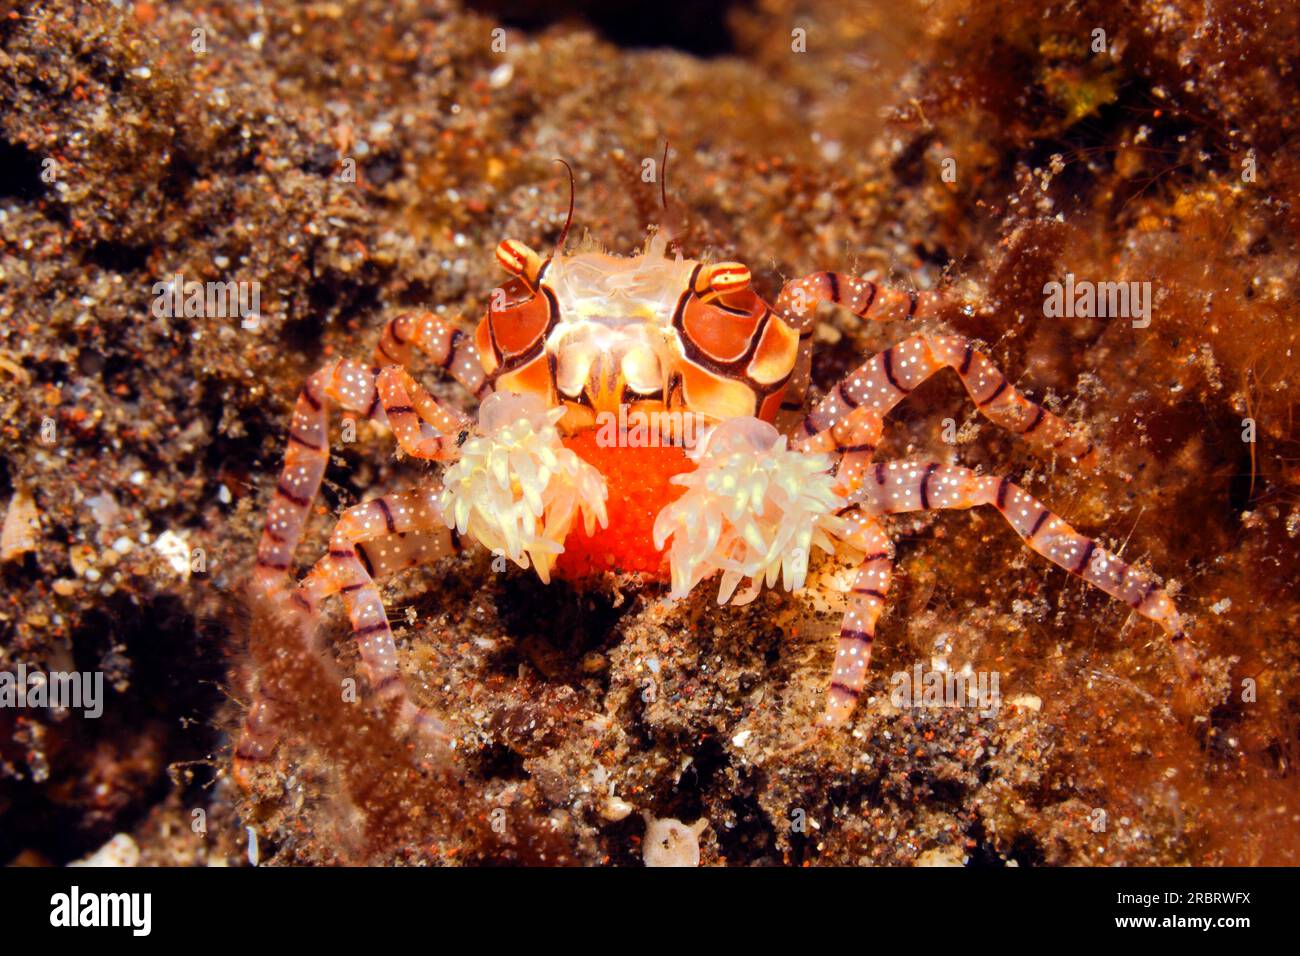 Boxer crab or Pom Pom Crab, Lybia tessellata, with red eggs, carrying an anemone,Triactis sp in its claw. Female crab with red eggs.Tulamben, Bali, In Stock Photo